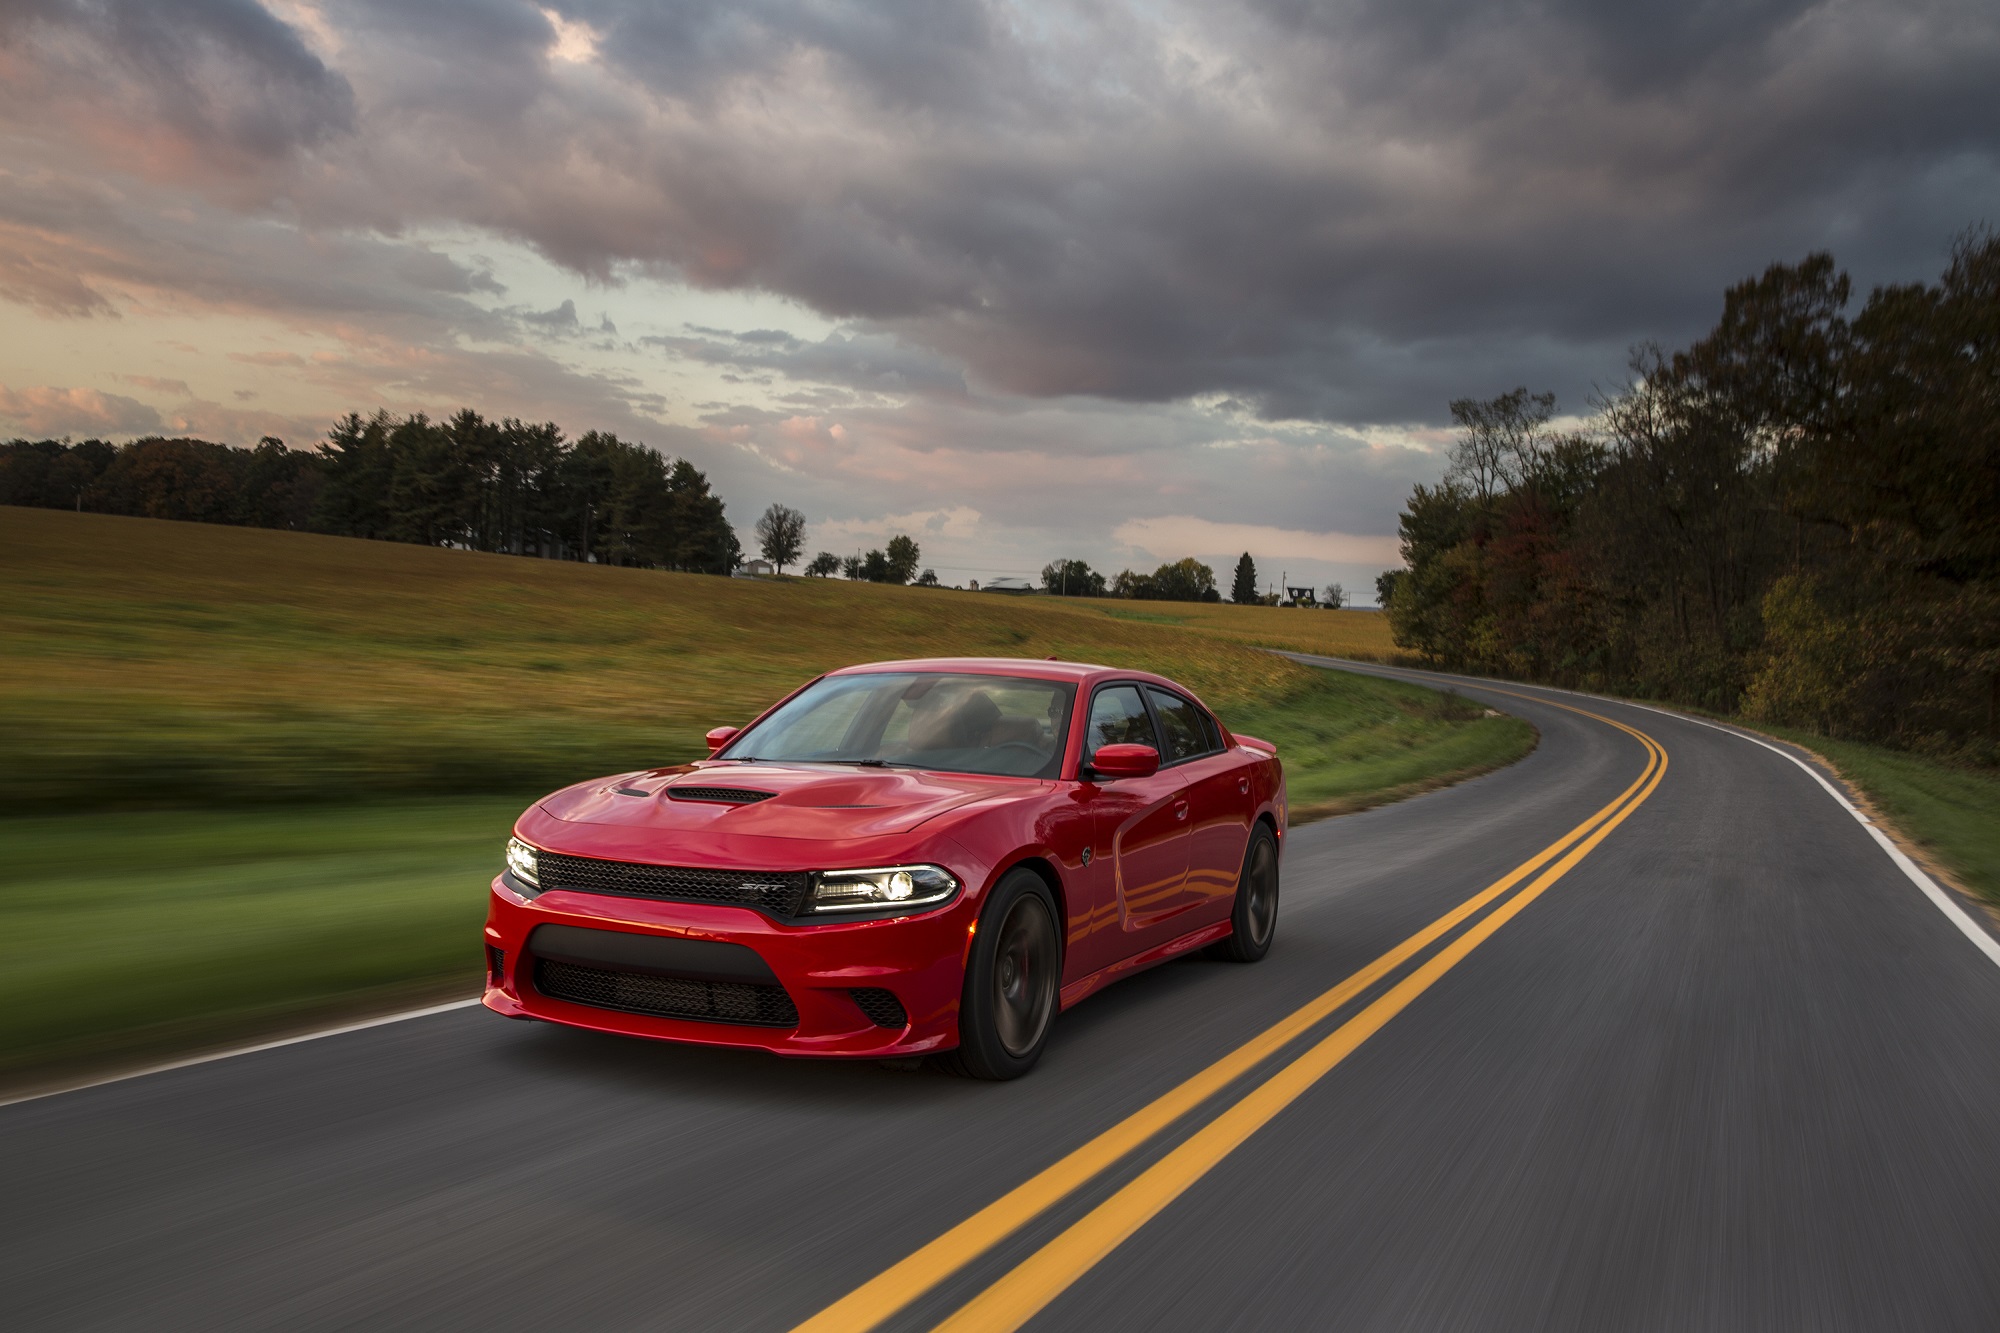 The 2015 Dodge Charger SRT Hellcat is even quicker than the Challenger SRT Hellcat on the list of the fastest used muscle cars.